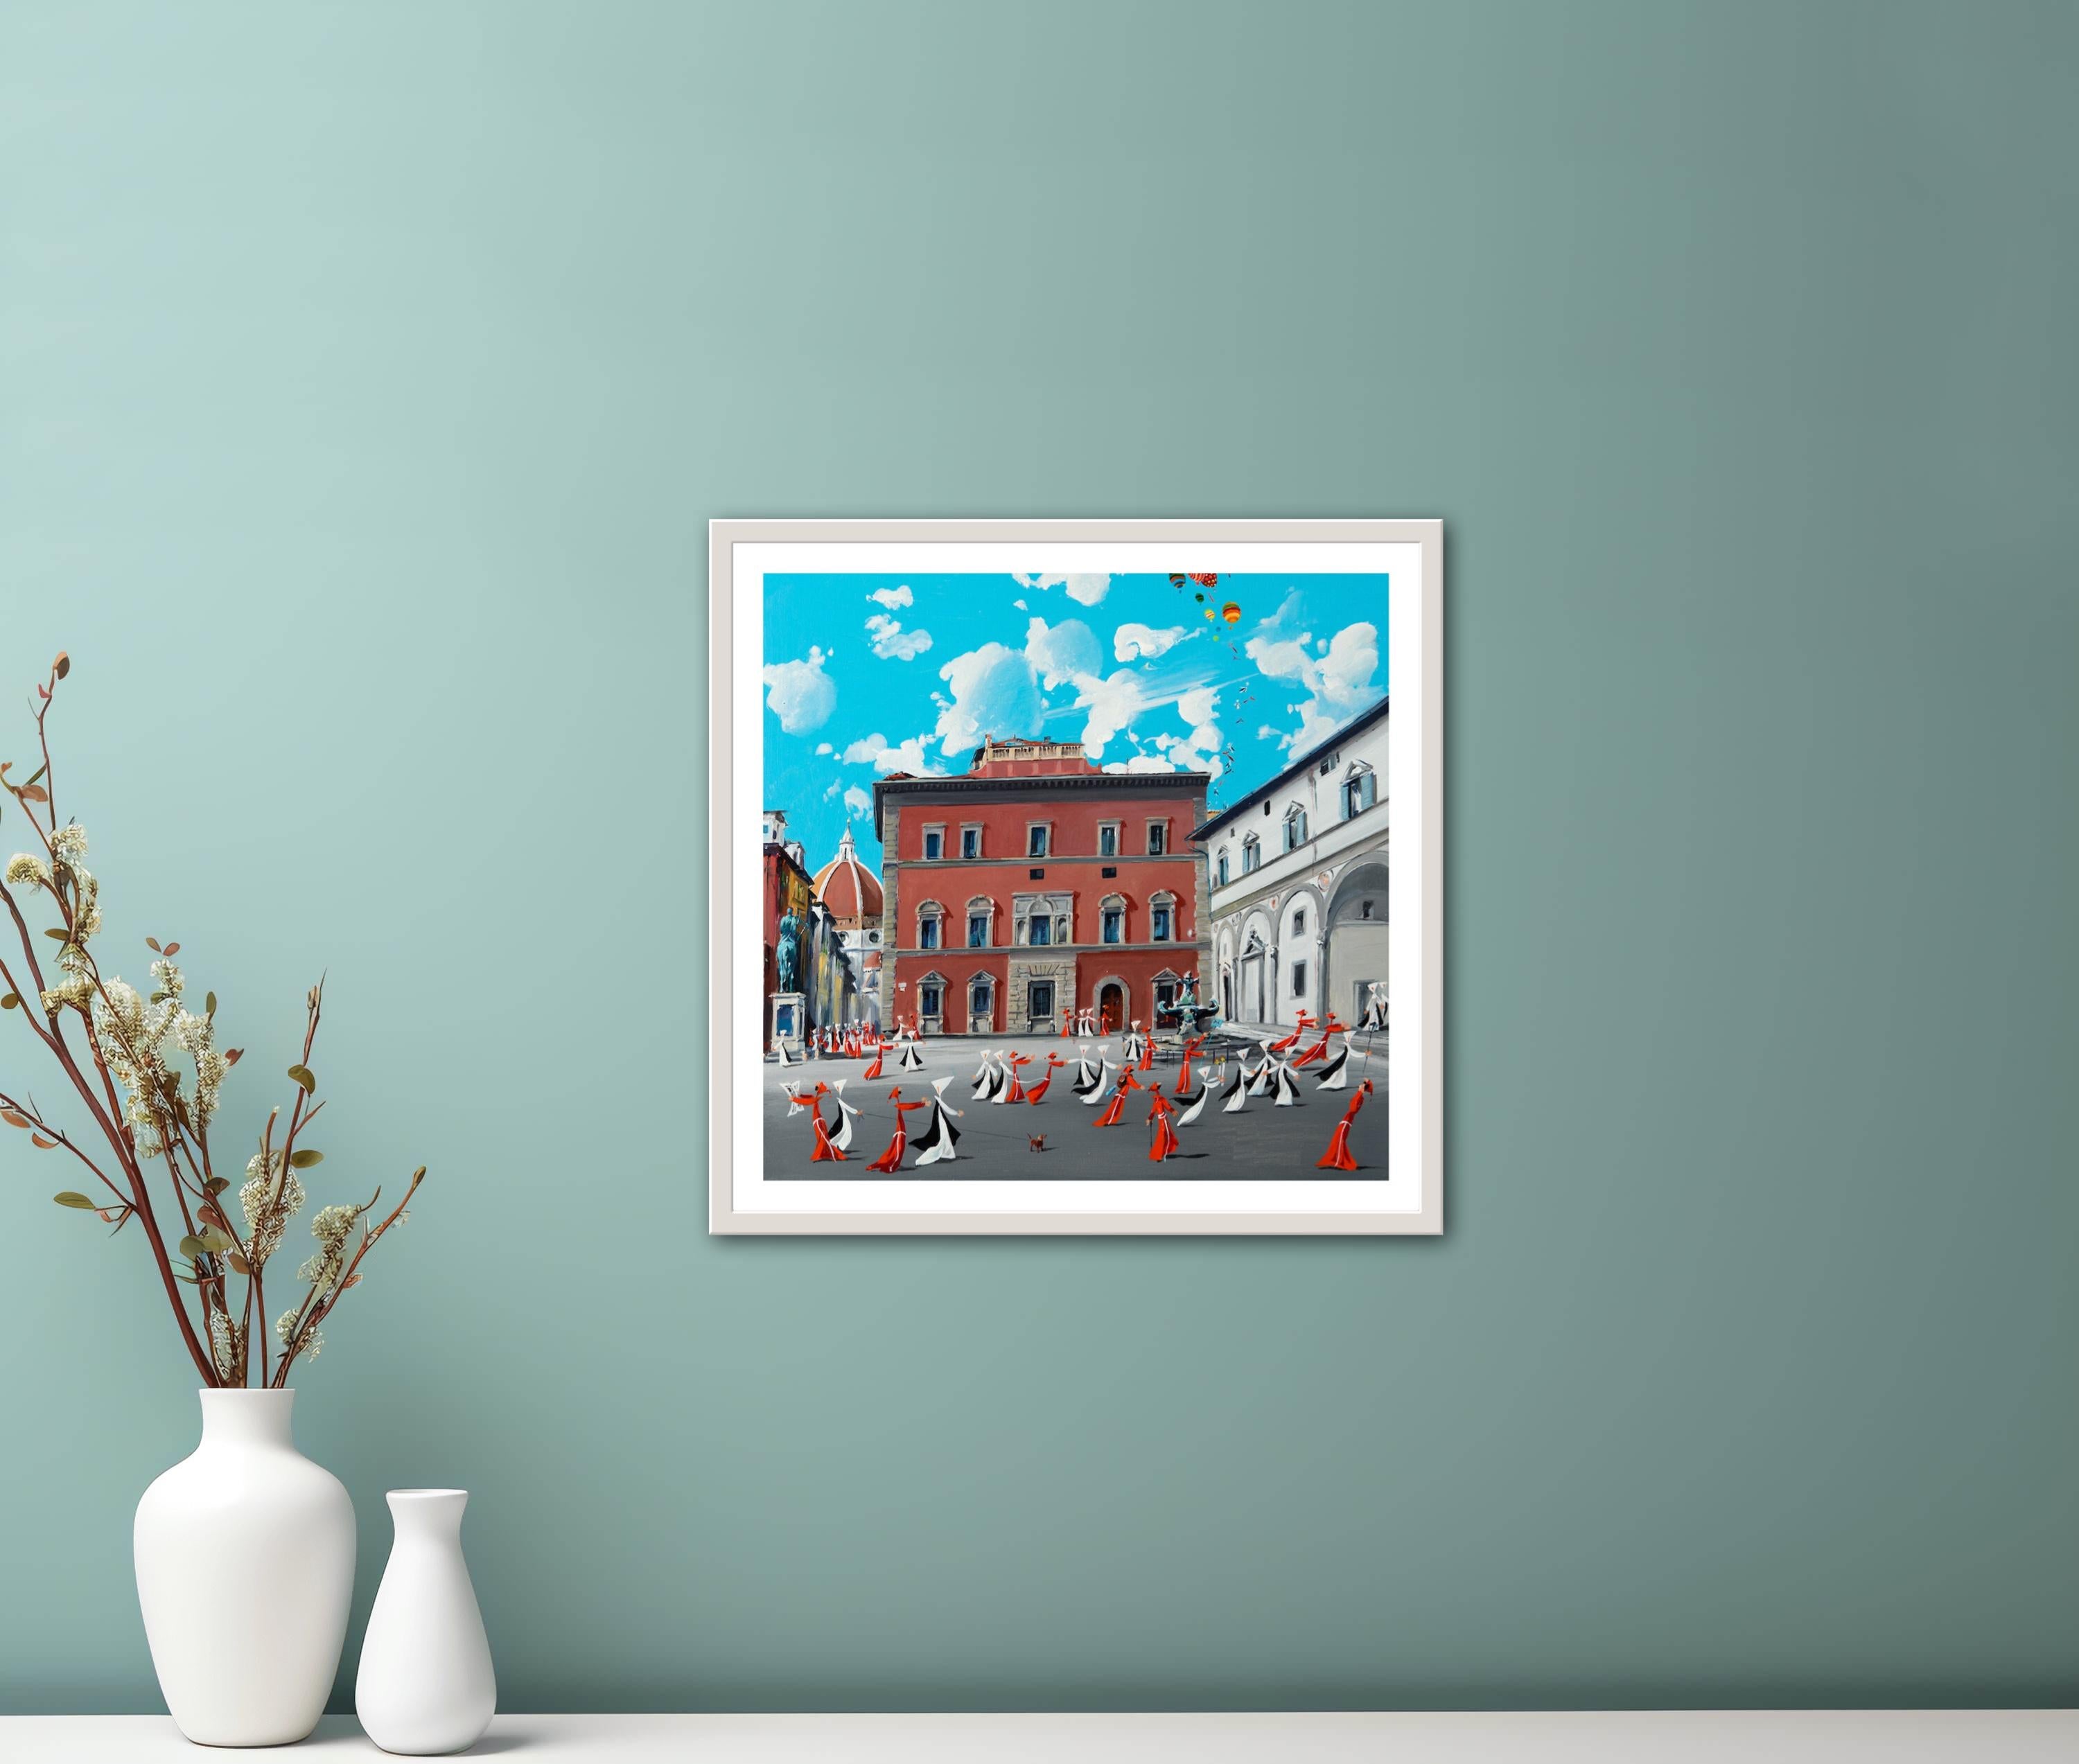 Piazza Santissima Annunziata 
Limited Edition series of 10
size: 50x50 cm 

ULIVIERO ULIVIERI
Ulivieri's art is characterized by its spontaneous flow and precise lines.   His imagination is a key component of his journey, which 
he calls